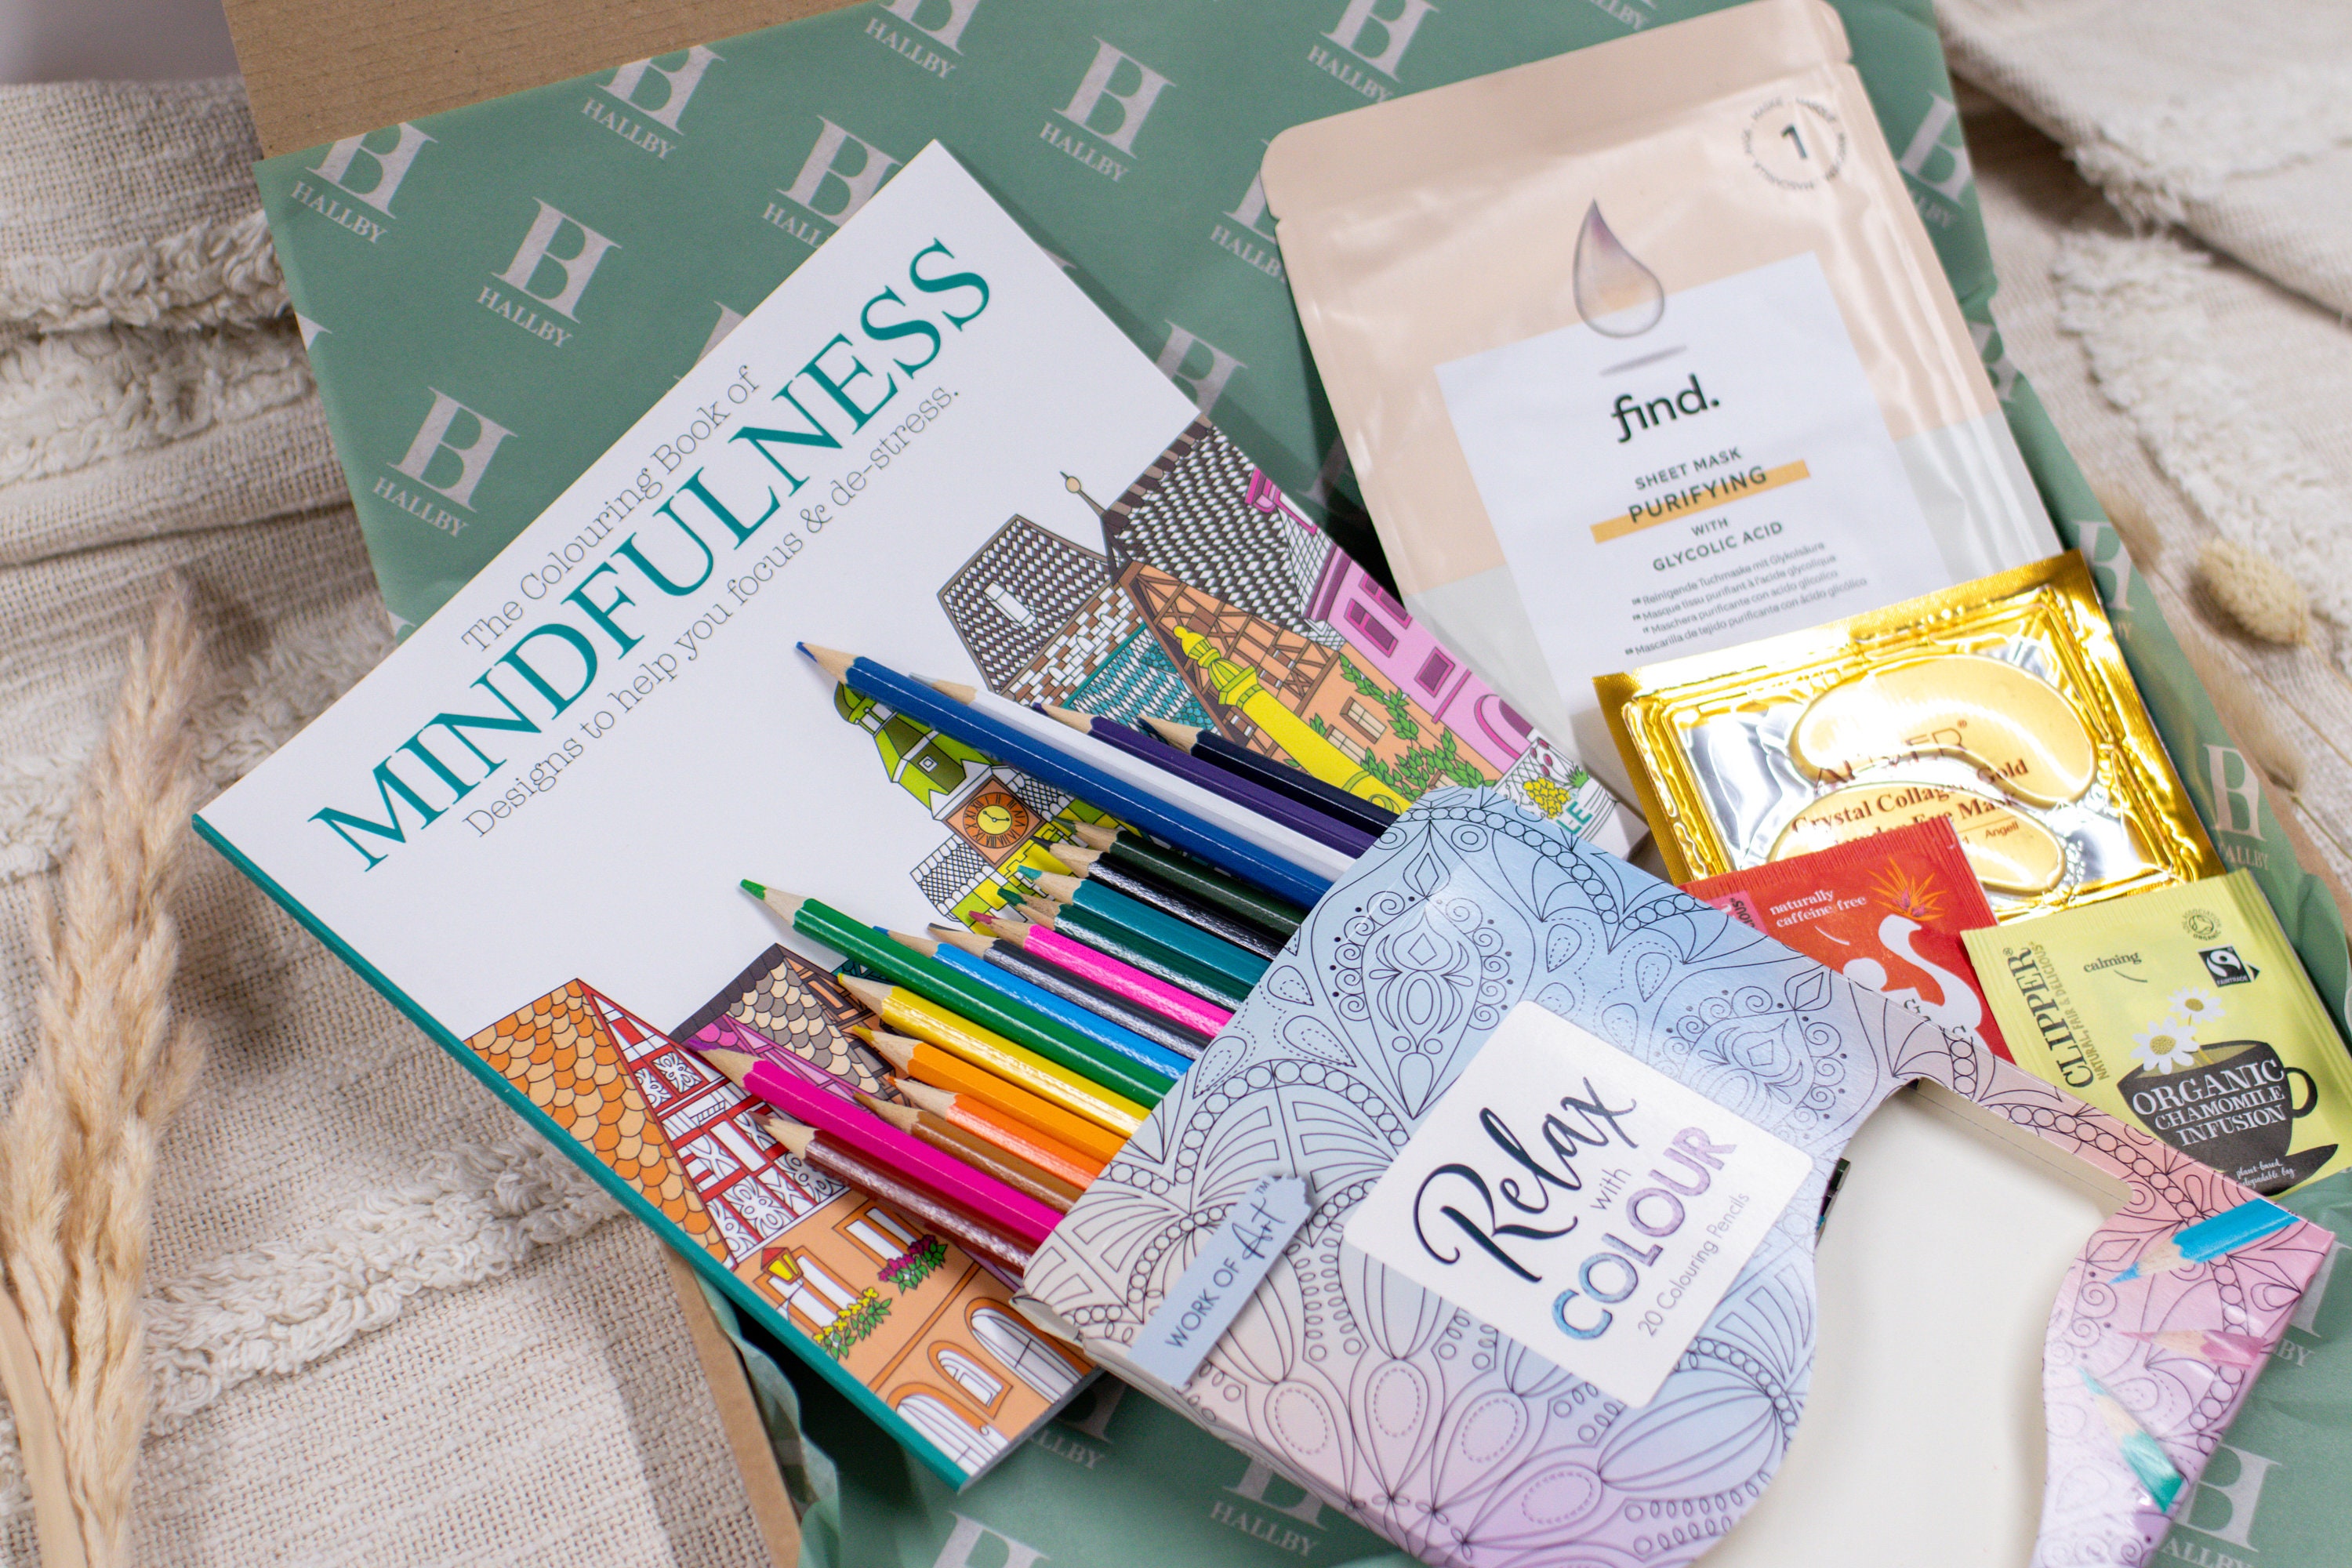 SpiceBox Sketch Plus Deluxe Meditative Adult Coloring Kit